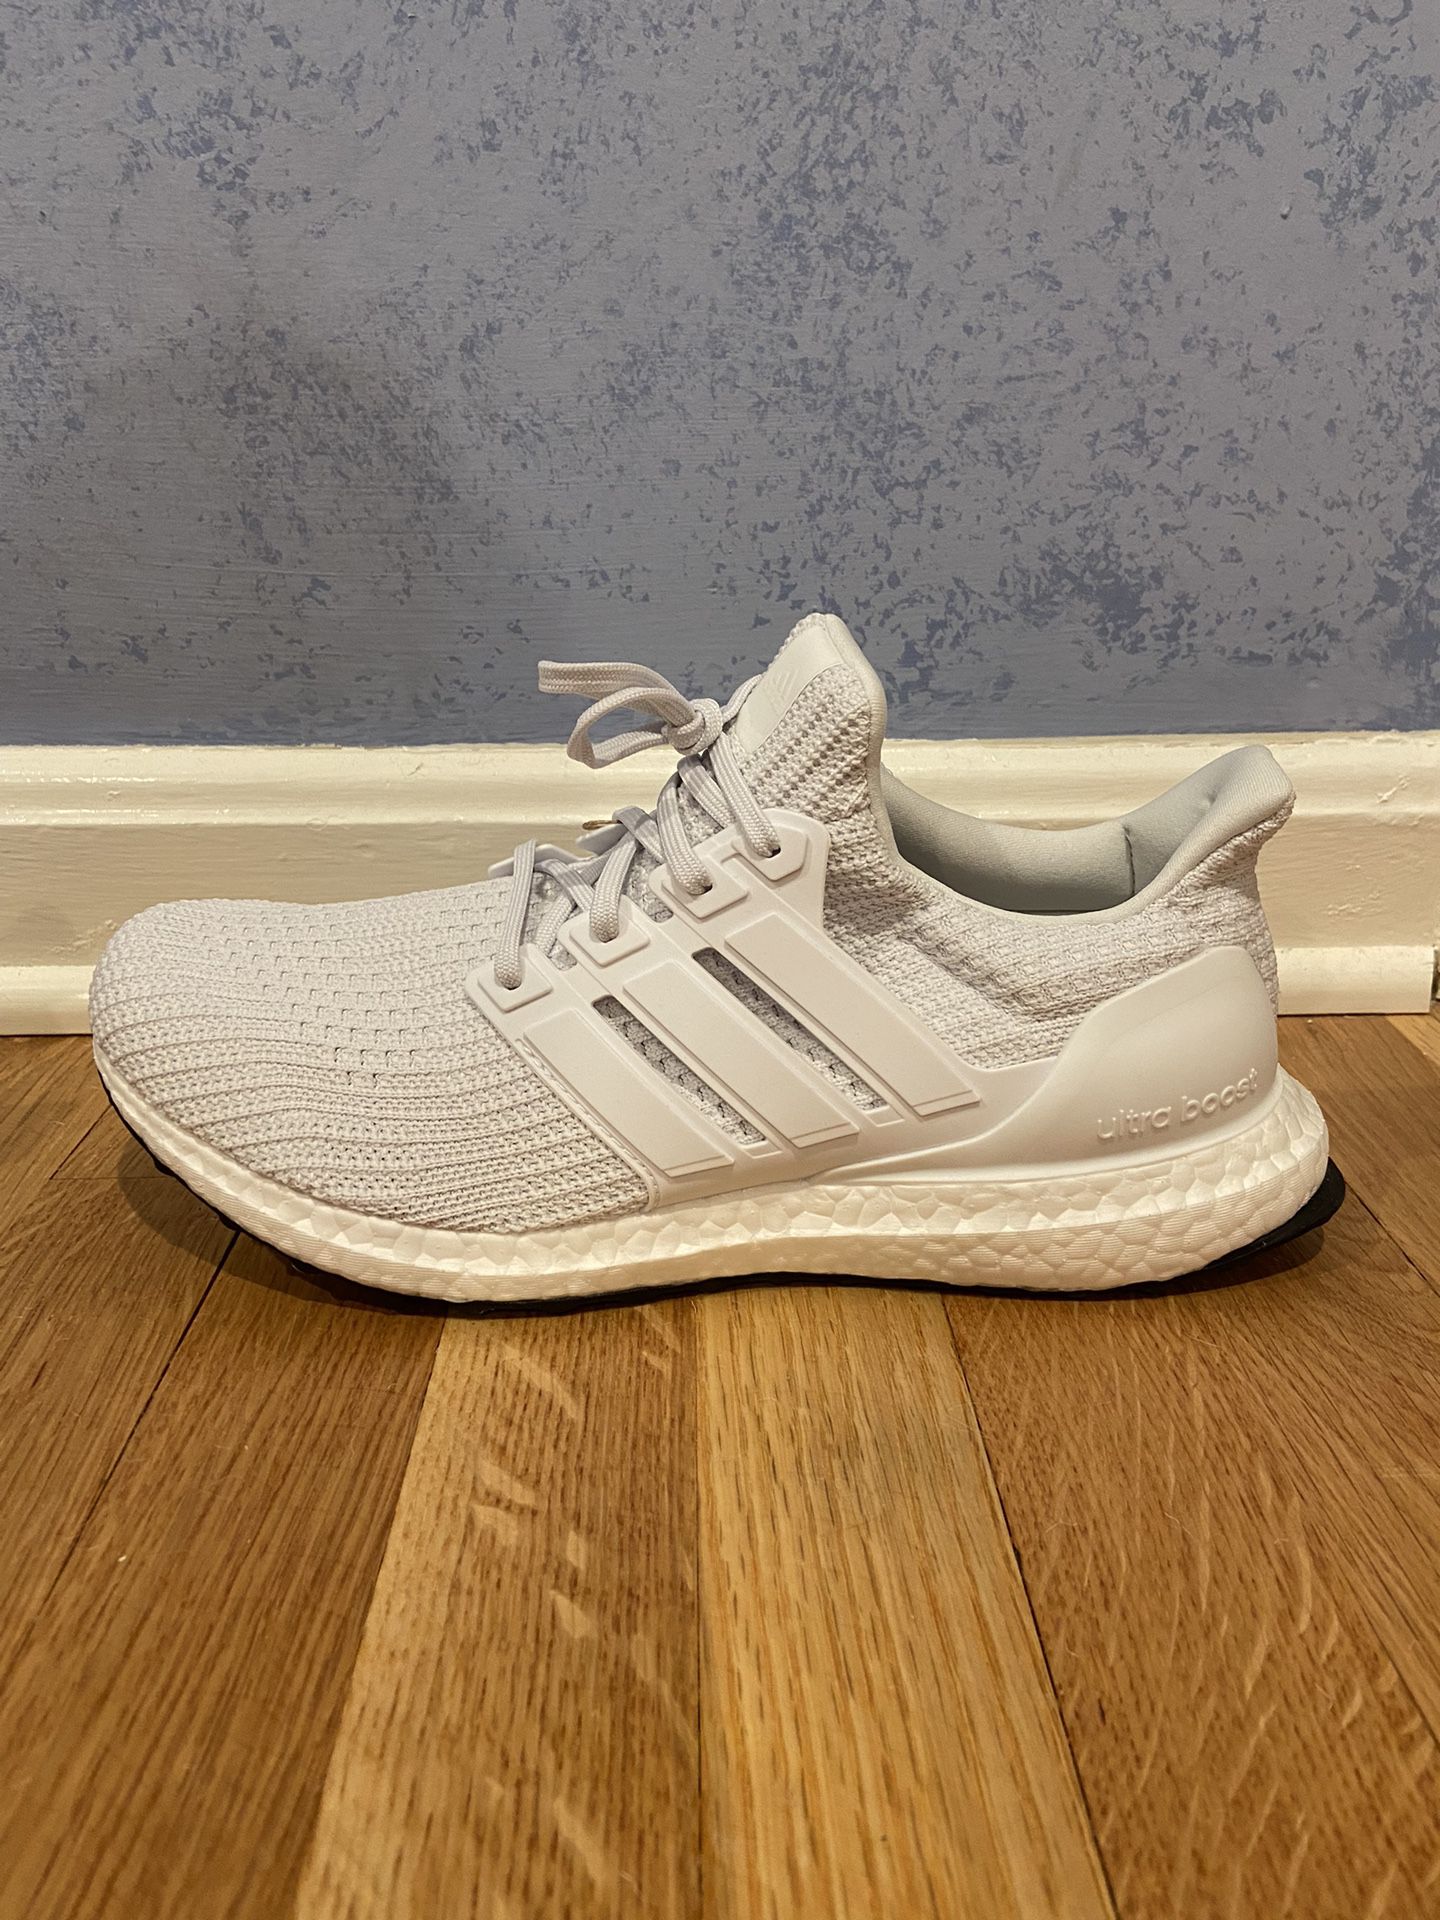 Adidas Ultraboost 4.0 DNA Size 8